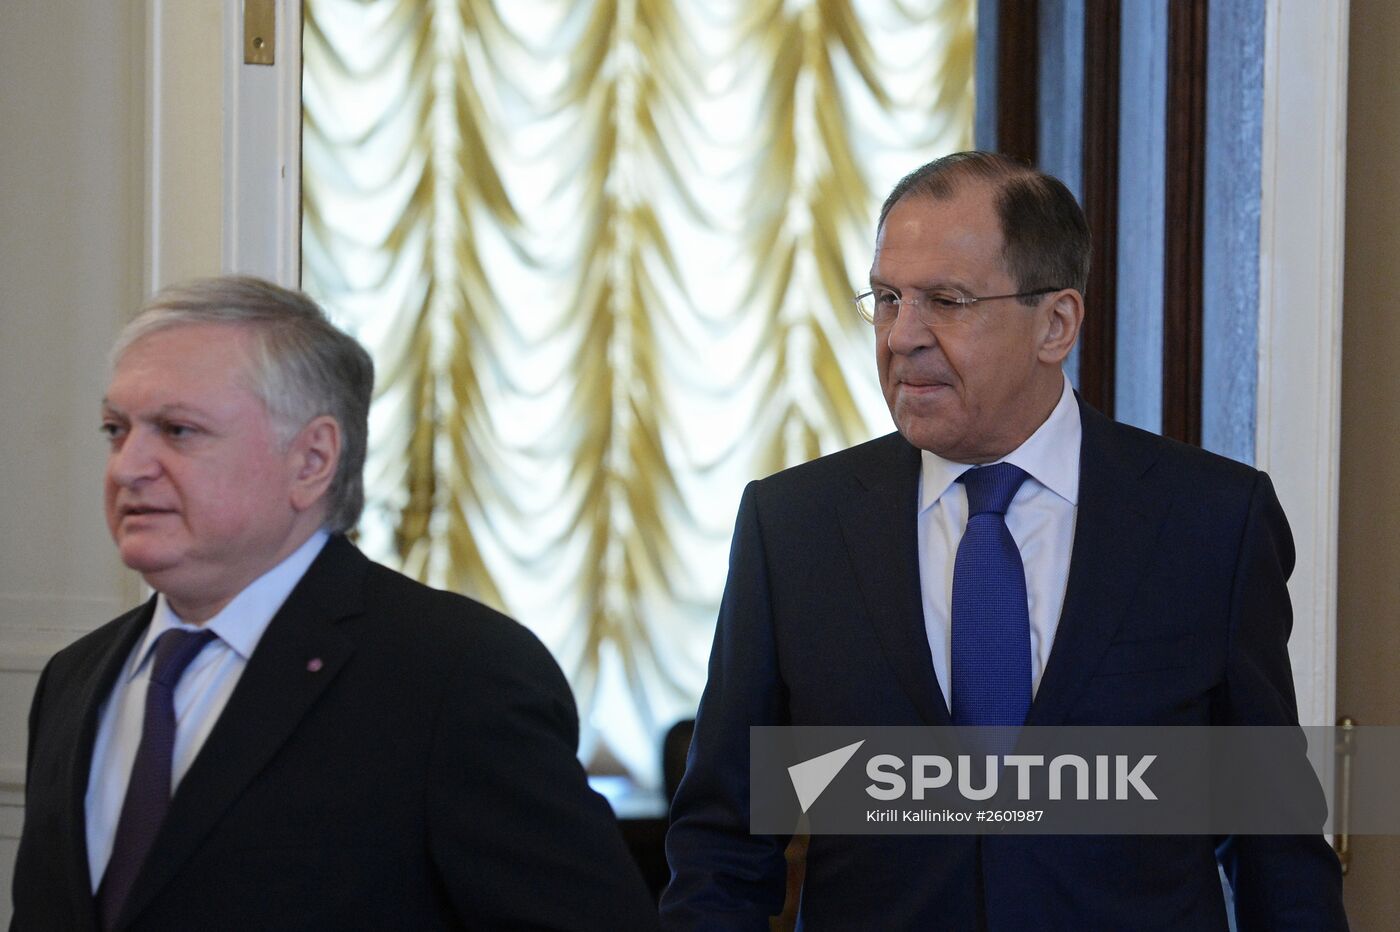 Meeting of Russian and Armenian foreign ministers